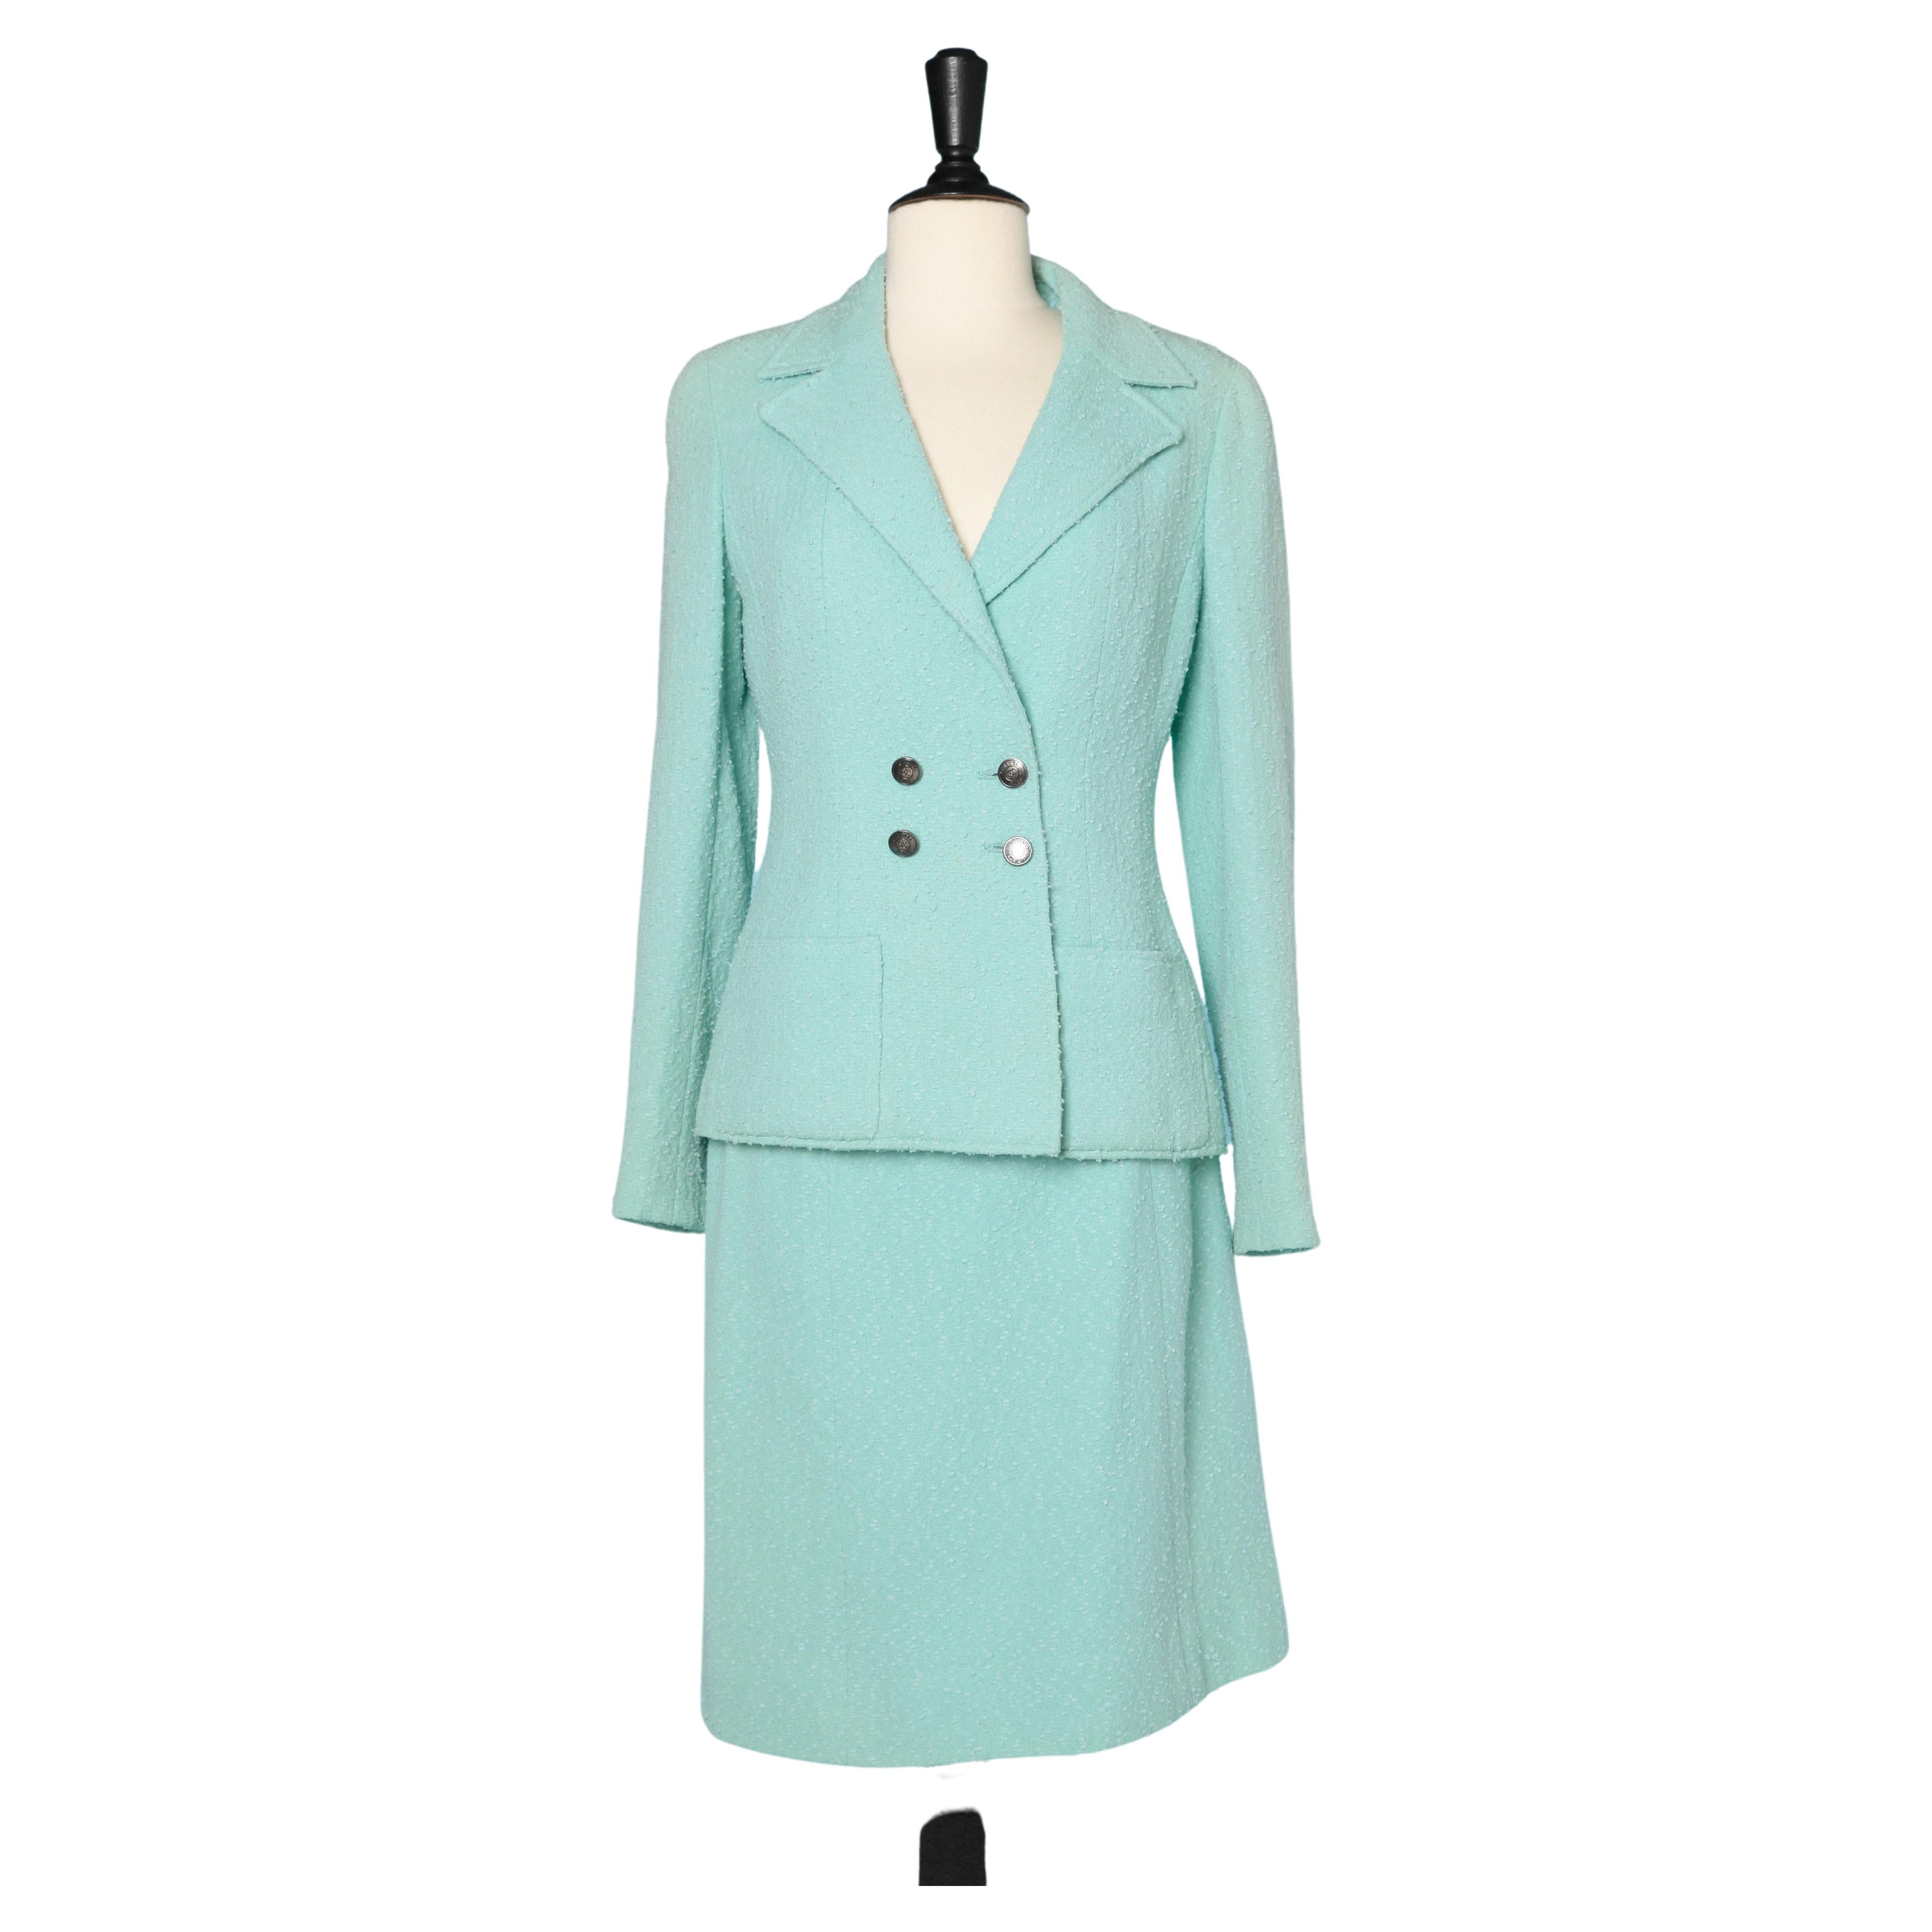 Mint green double-breasted skirt suit in tweed Chanel Boutique 